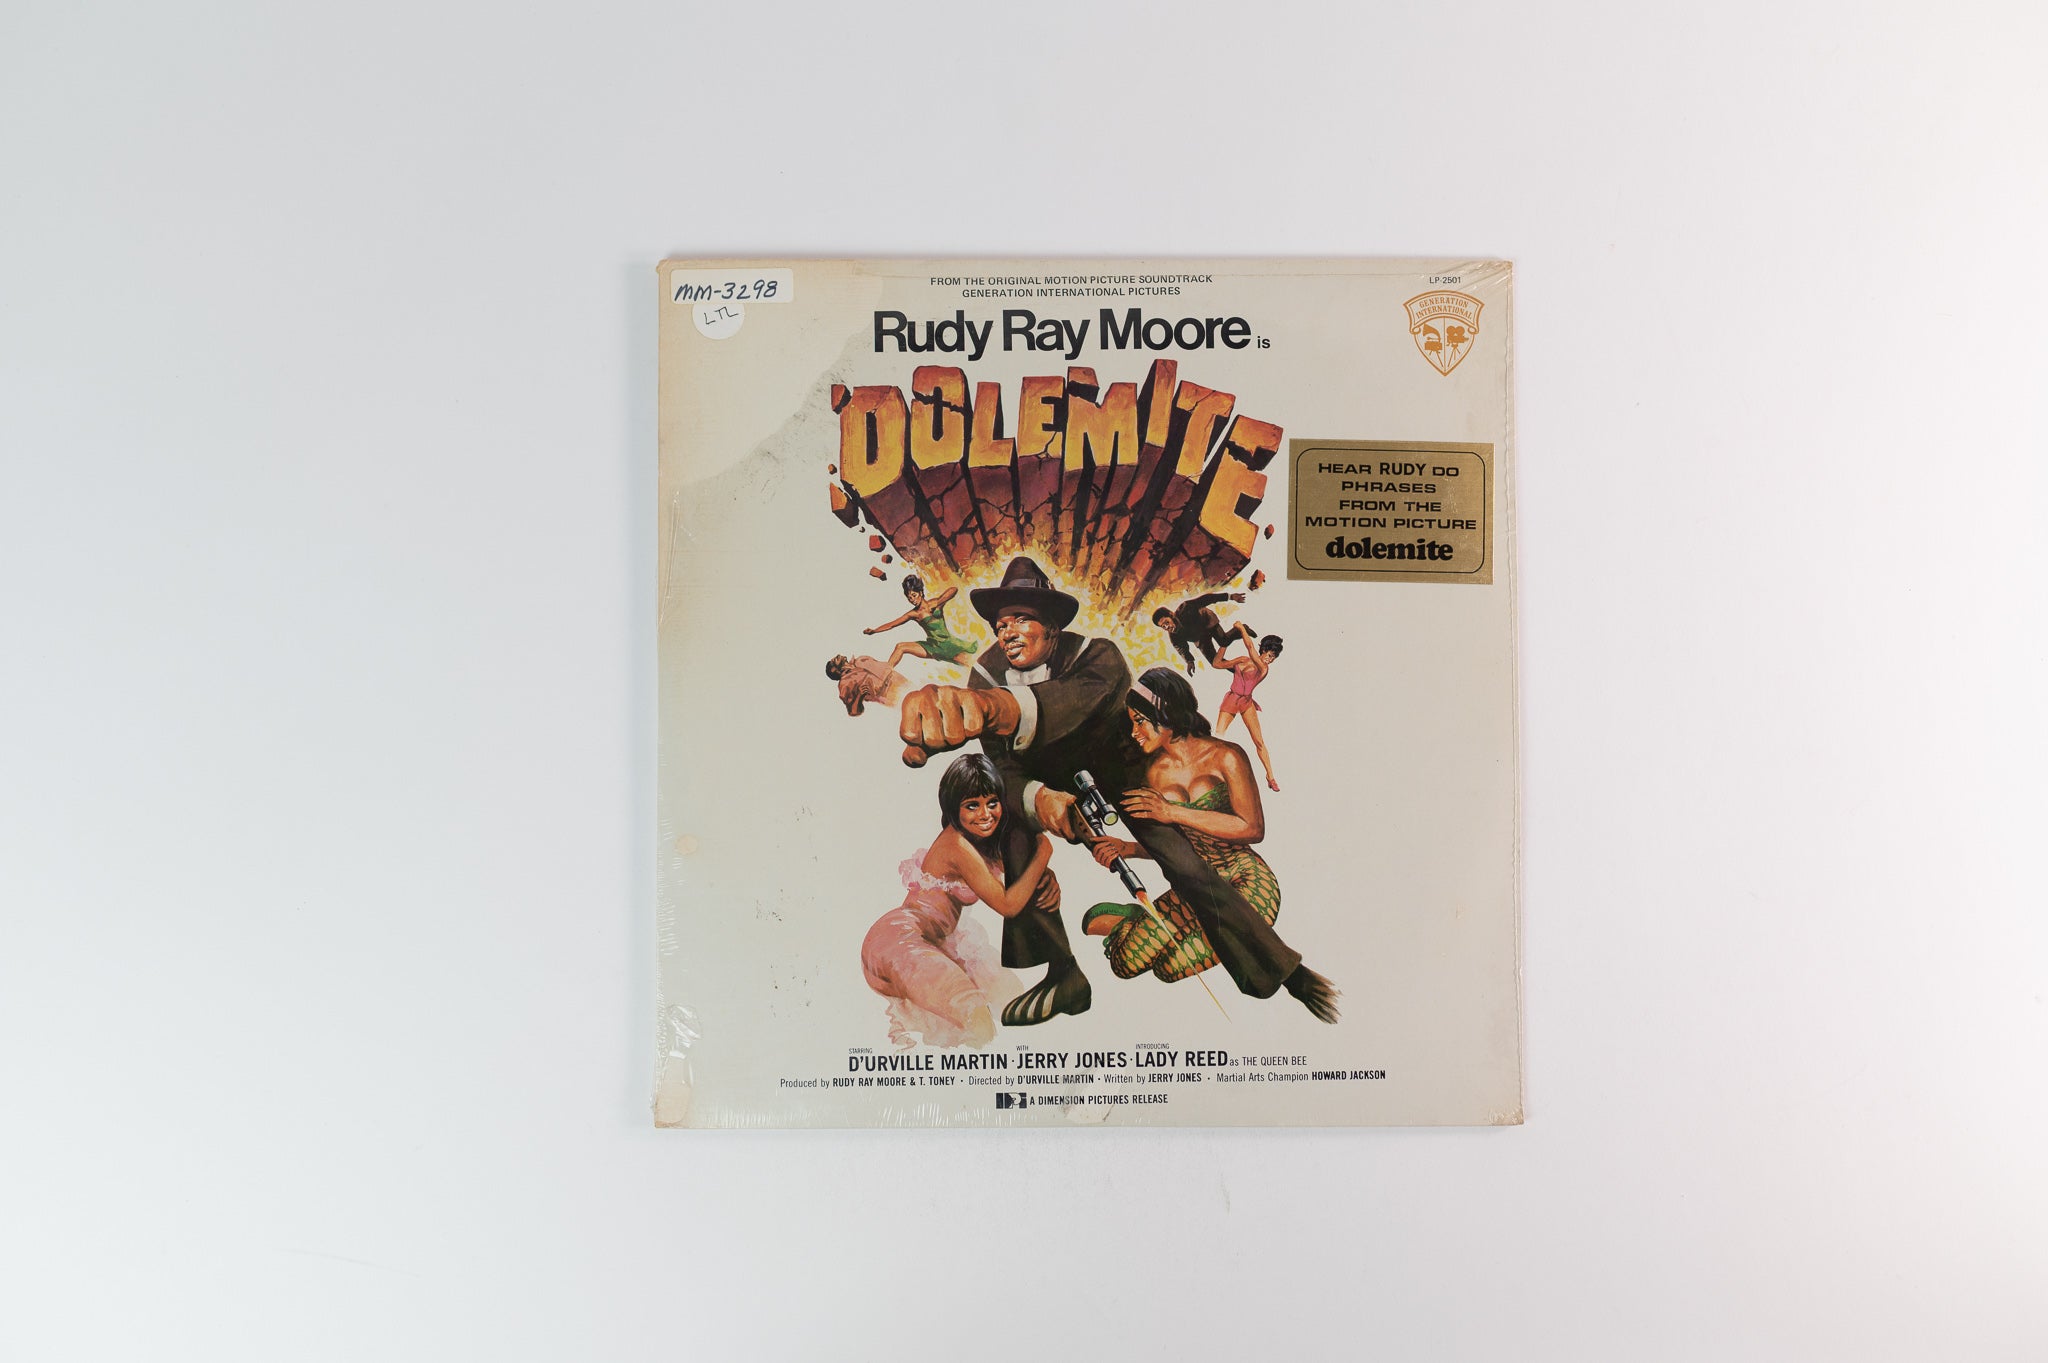 Rudy Ray Moore - Rudy Ray Moore Is "Dolemite" (Original Motion Picture Soundtrack) on Generation International Sealed